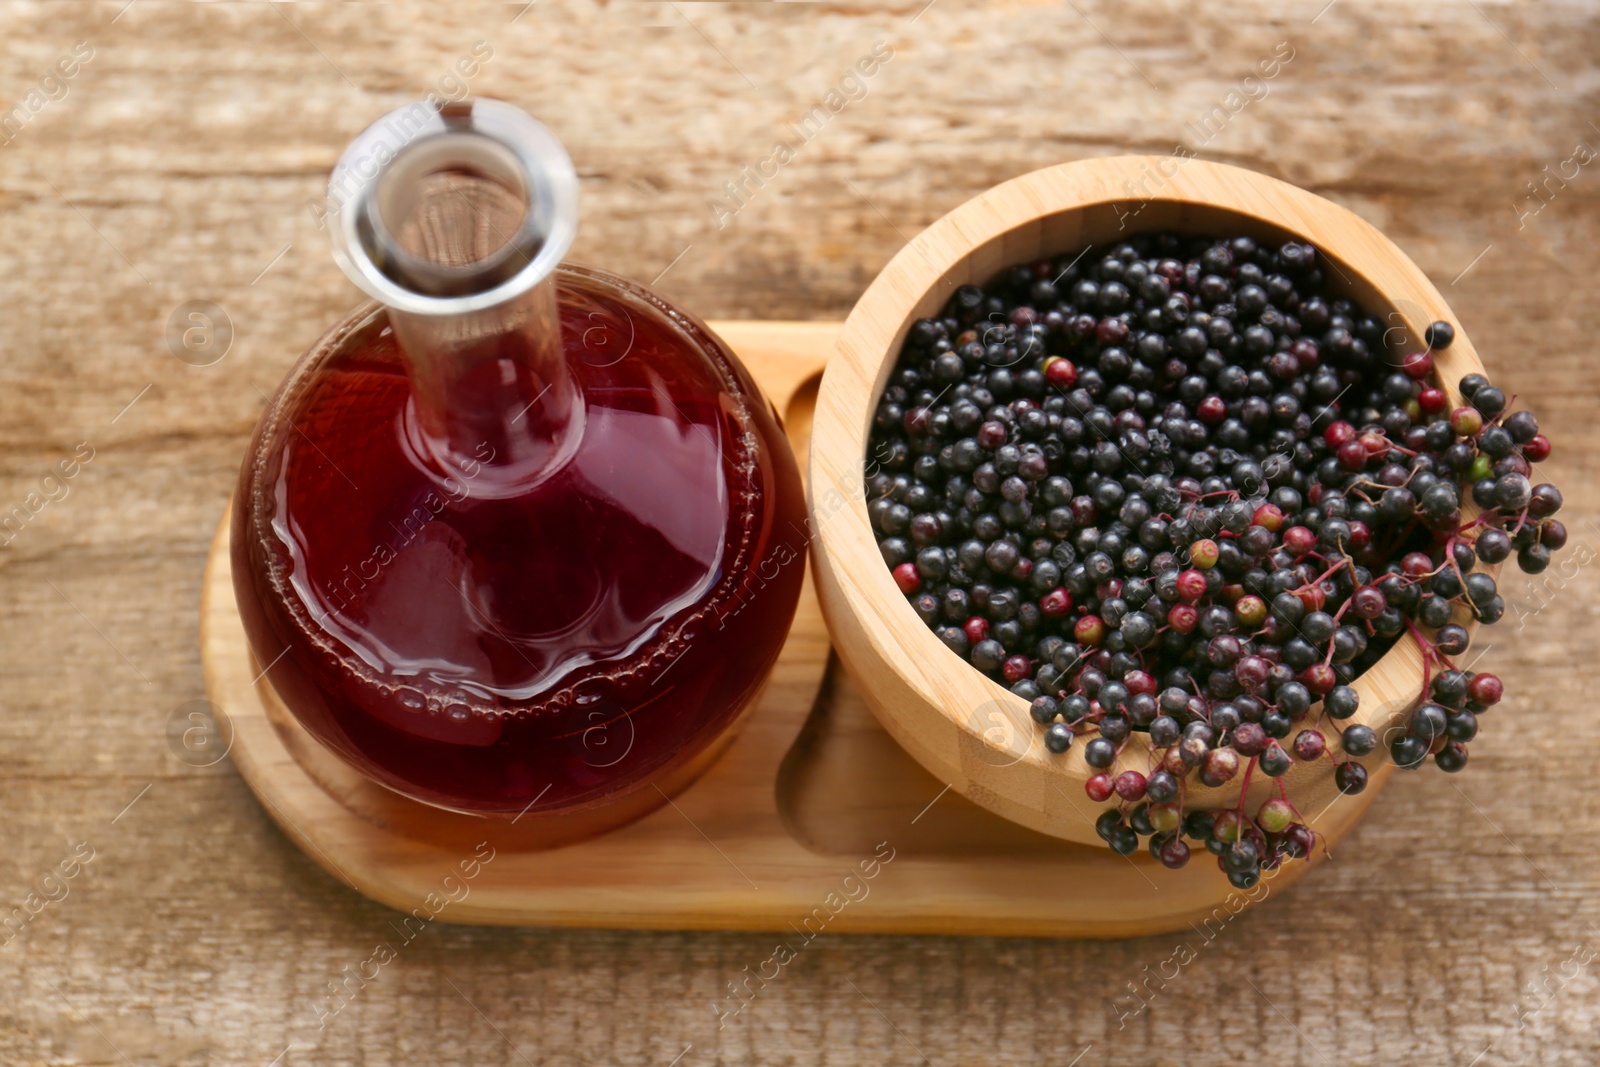 Photo of Elderberry wine and bowl with Sambucus berries on wooden table, above view